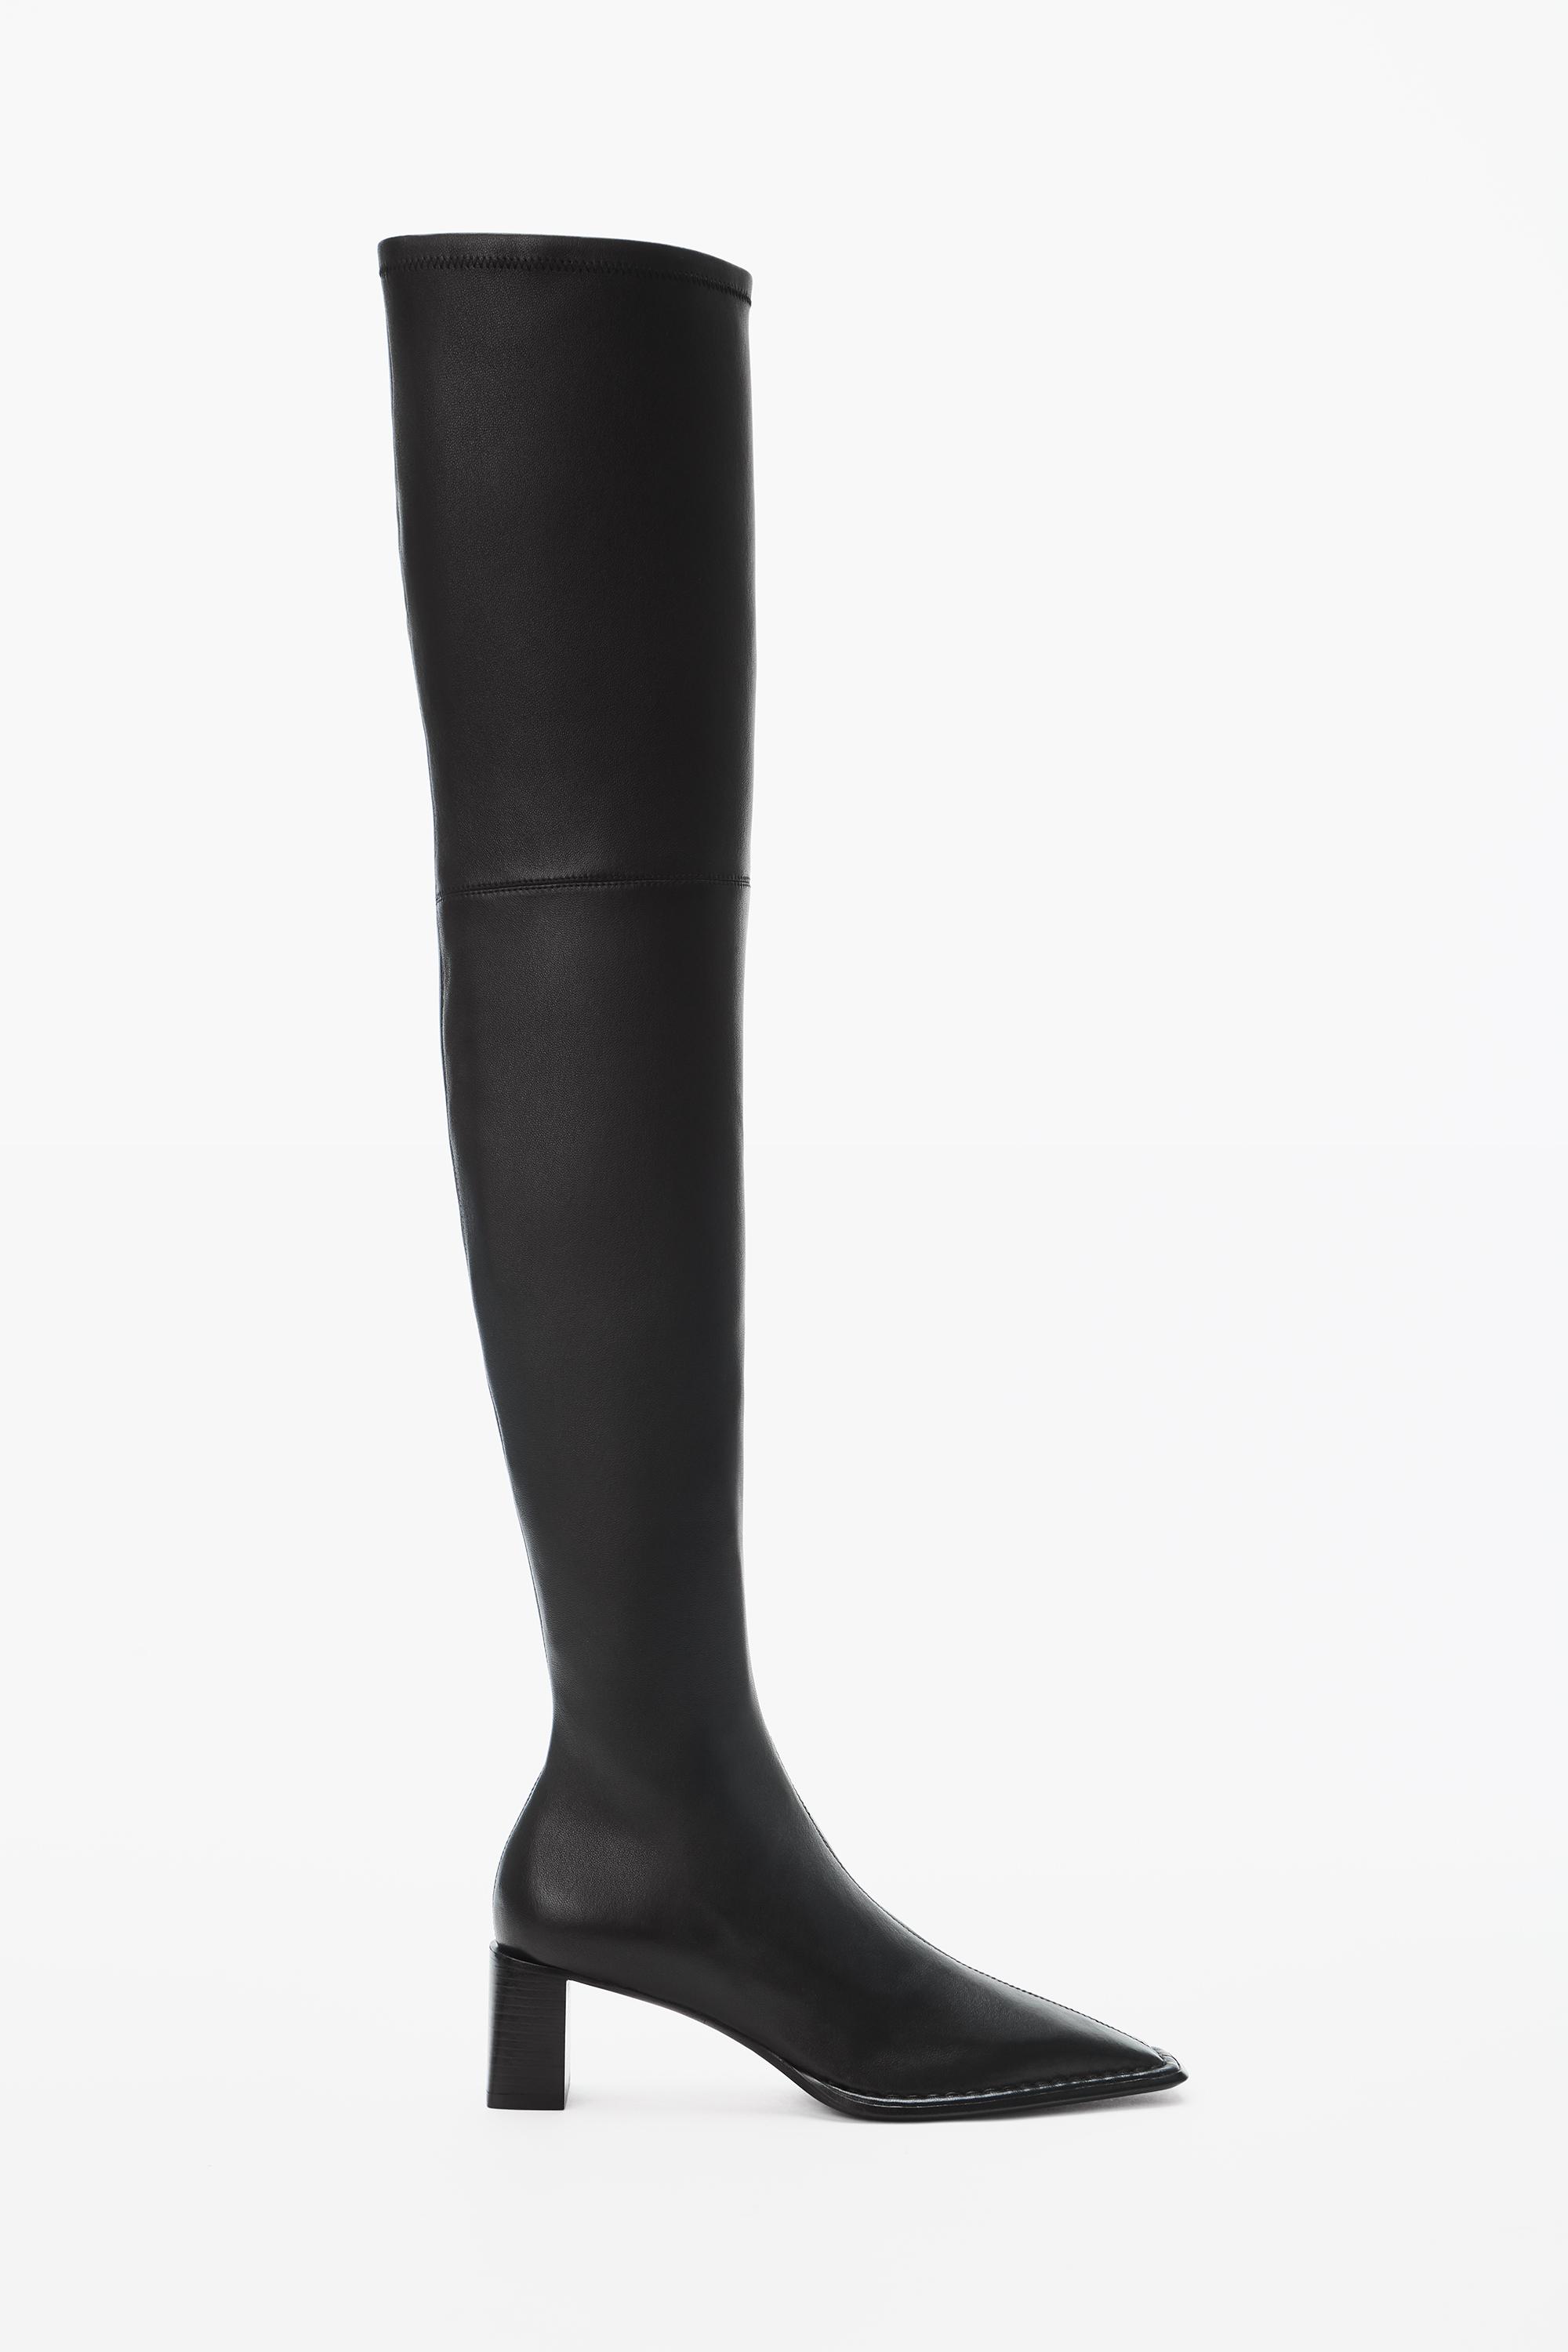 Alexander Wang Aldrich 55 Thigh-high Boot In Leather in Black | Lyst